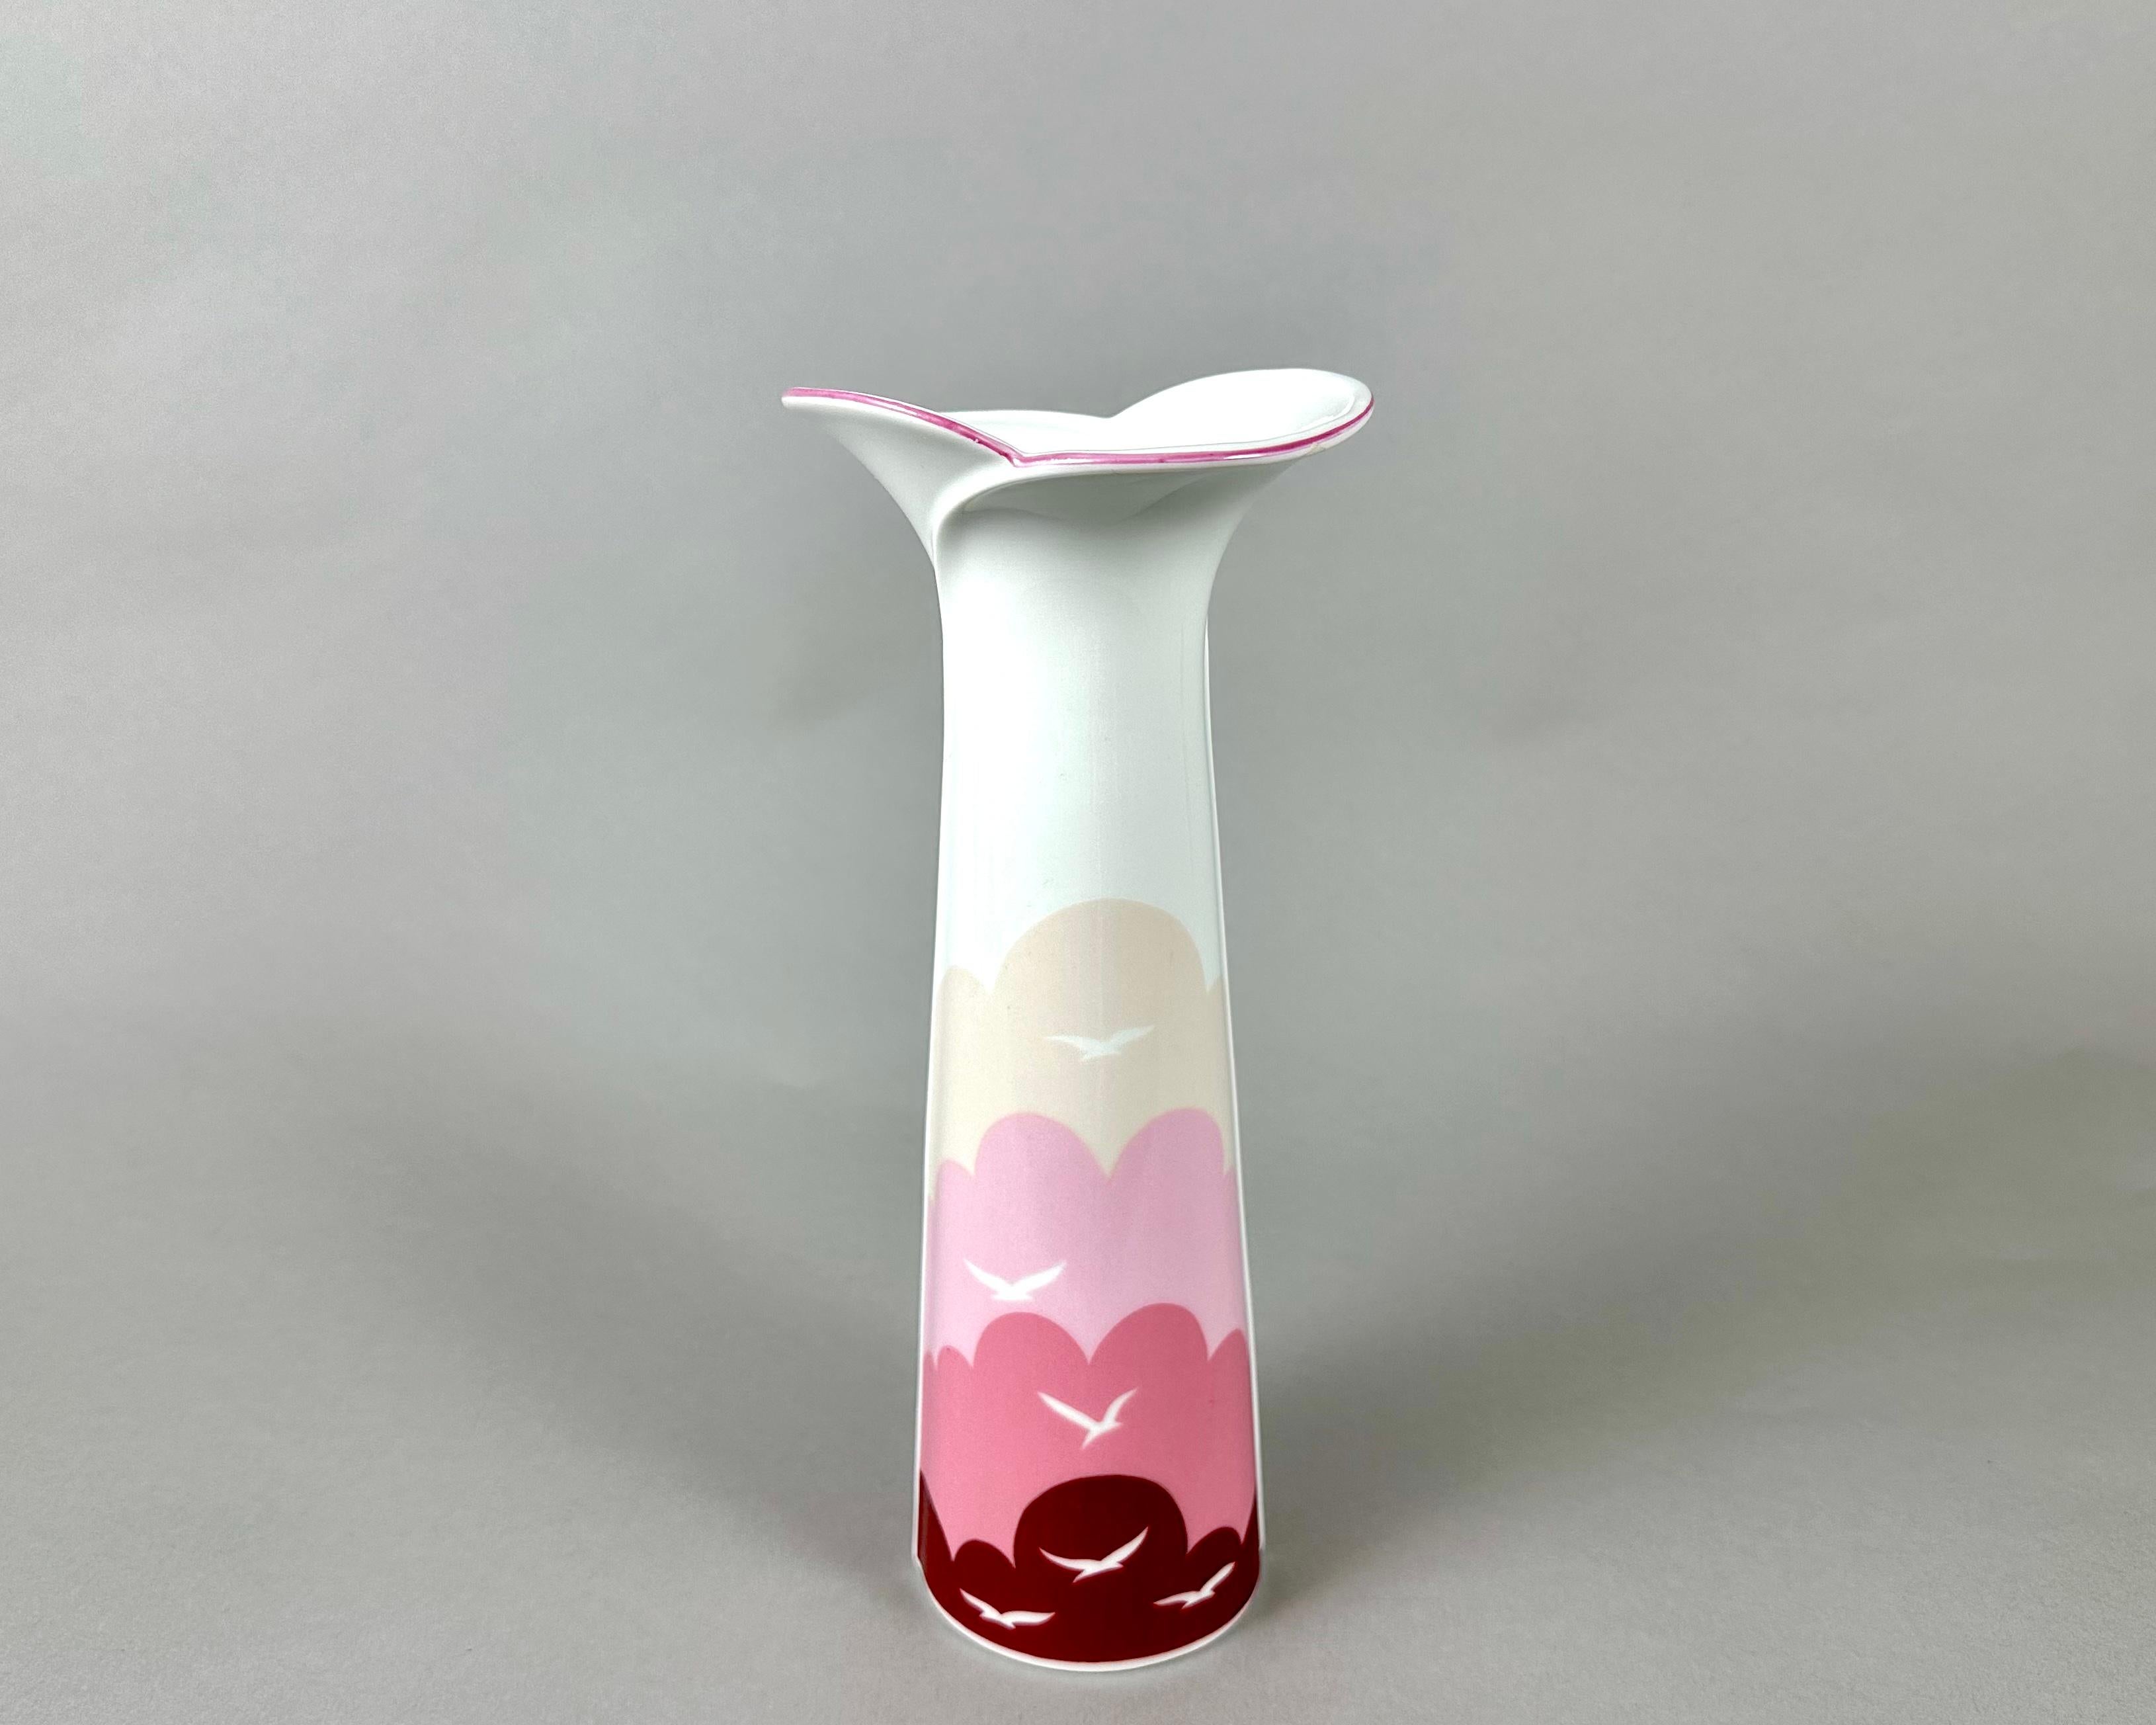 Beautiful vintage porcelain vase in white and pink, birds decor by famous manufacturer Royal Porzellan Bavaria. Germany. 1970s.

The vase will delight the owners with its functionality and beauty for a long time.

A great designer original vase.